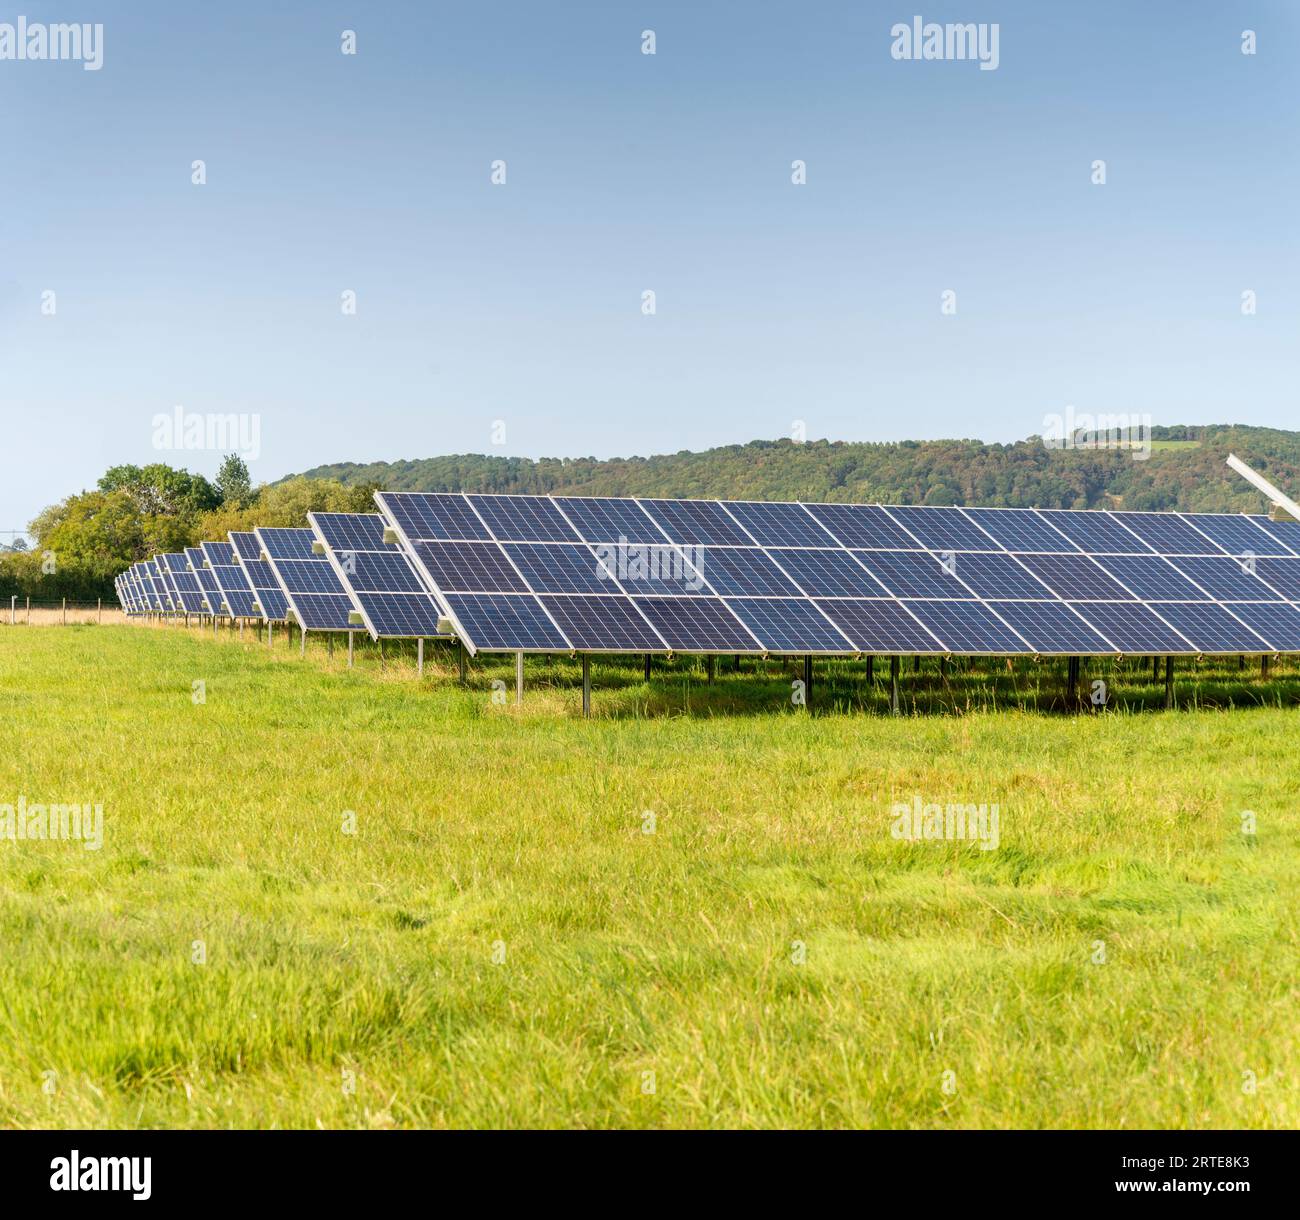 Solar energy production,at a site in the countryside, during the summertime in rural England,providing clean sustainable energy to local areas and vil Stock Photo